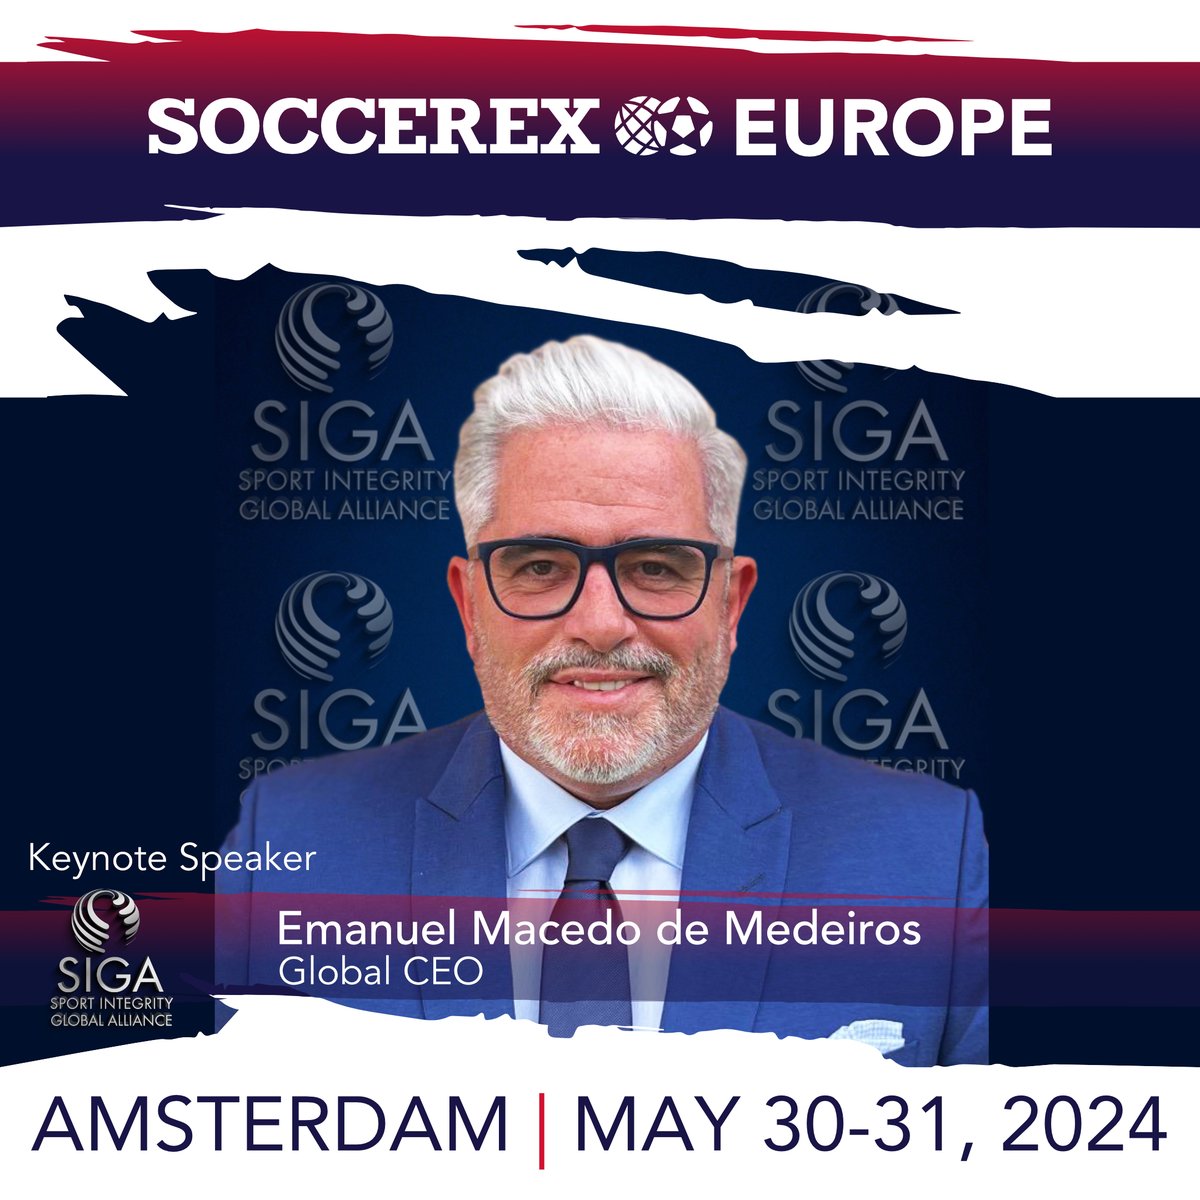 We are thrilled to announce that @EmanuelGsc, Global CEO of @SIGAlliance, is joining #soccerexeurope as a Keynote Speaker, this May 30th - 31st, at the @cruijffarena ⚽